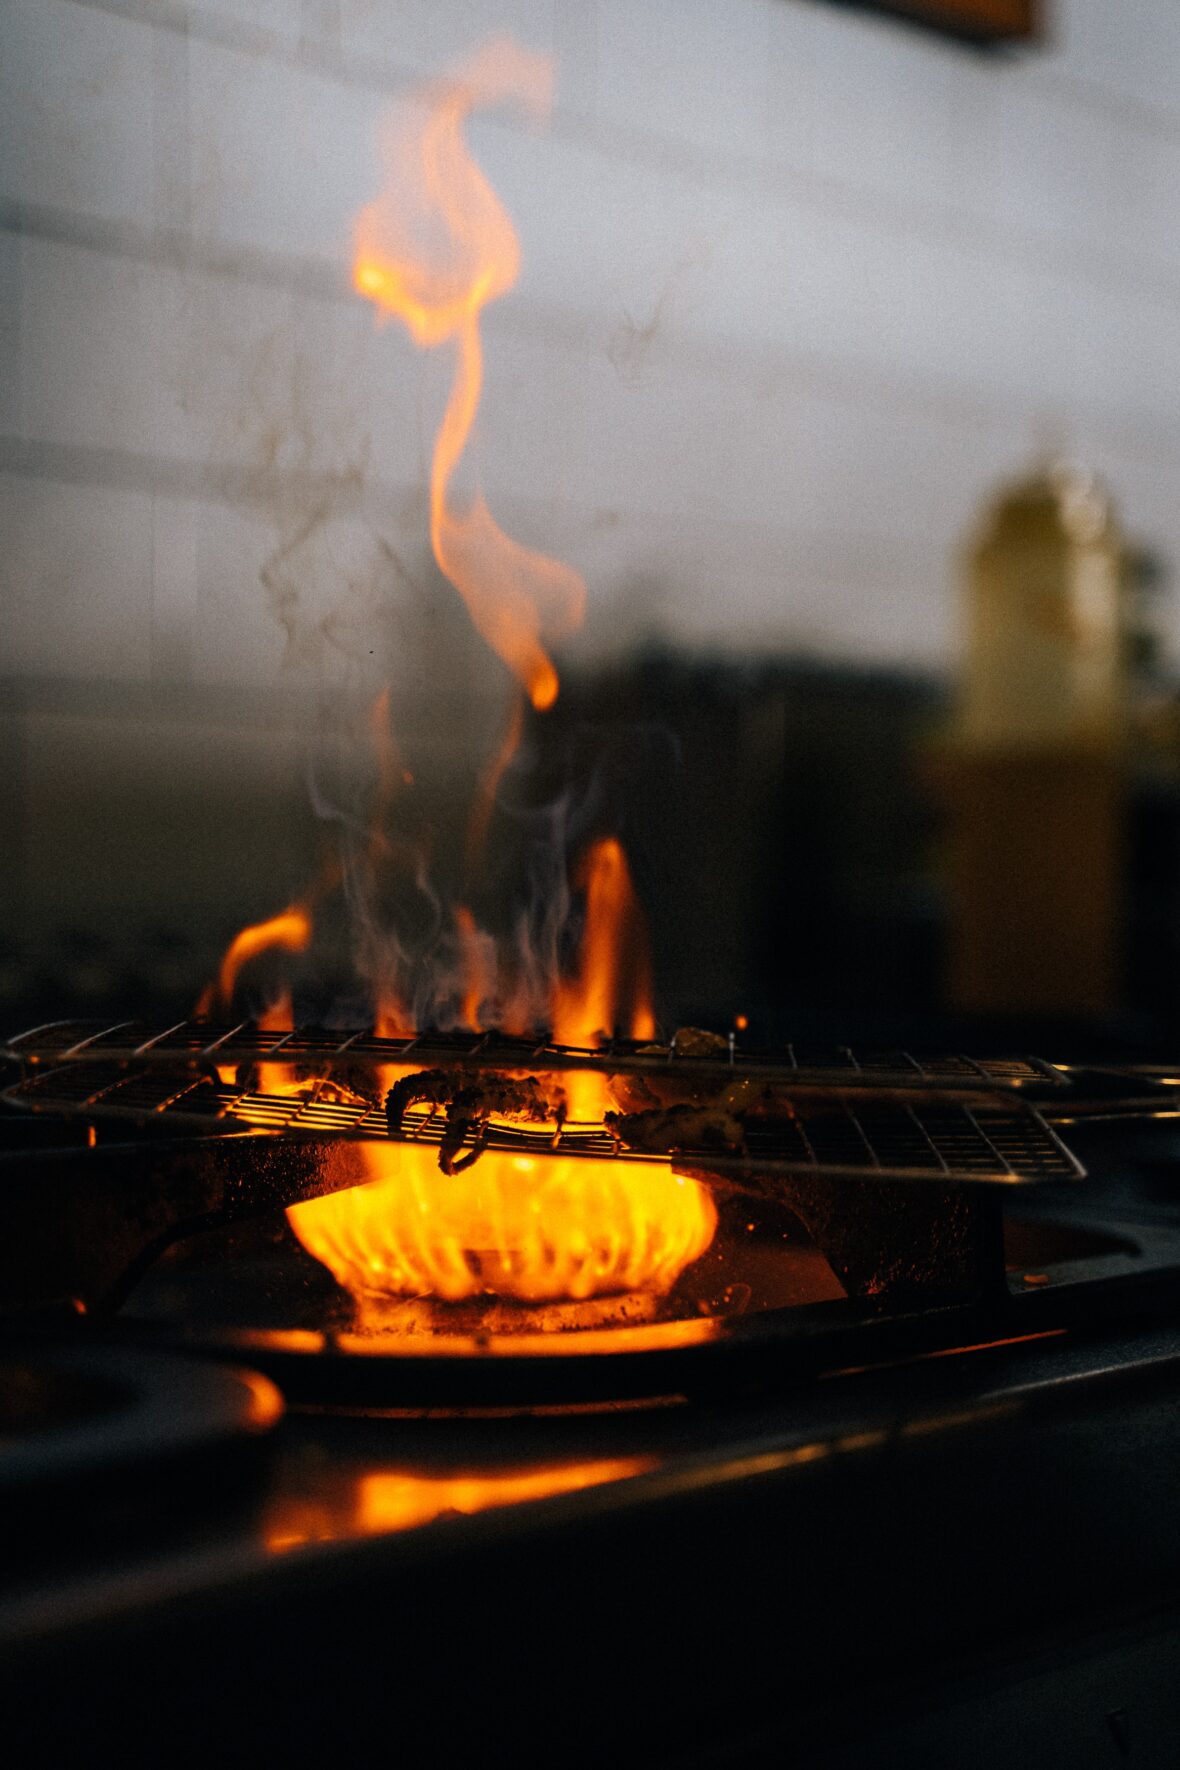 How to Put Out a Kitchen Fire Because OMG FLAMES